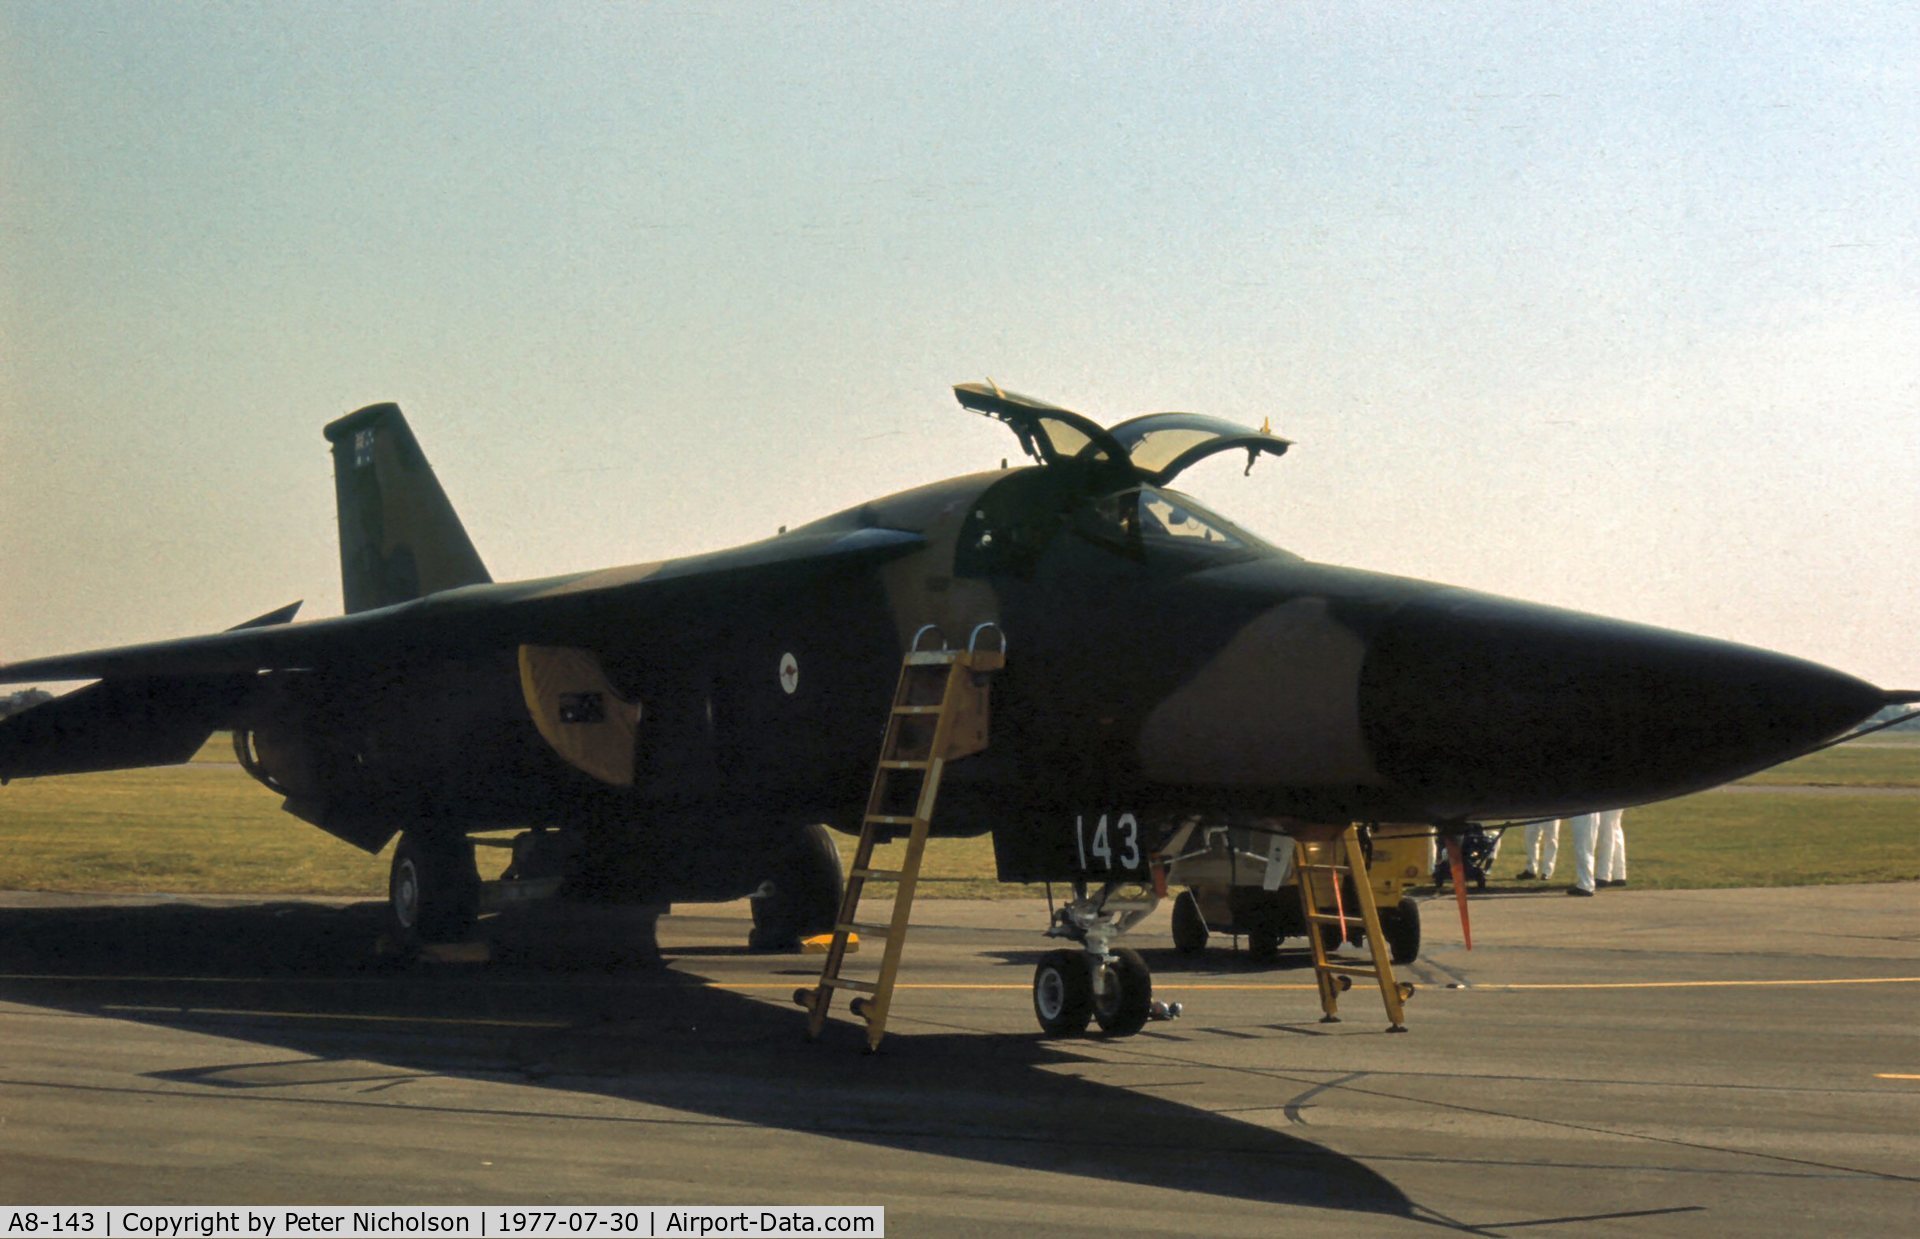 A8-143, 1973 General Dynamics F-111C Aardvark C/N D1-19, F-111C of 6 Squadron Royal Australian Air Force at the 1977 Royal Review at RAF Finningley.